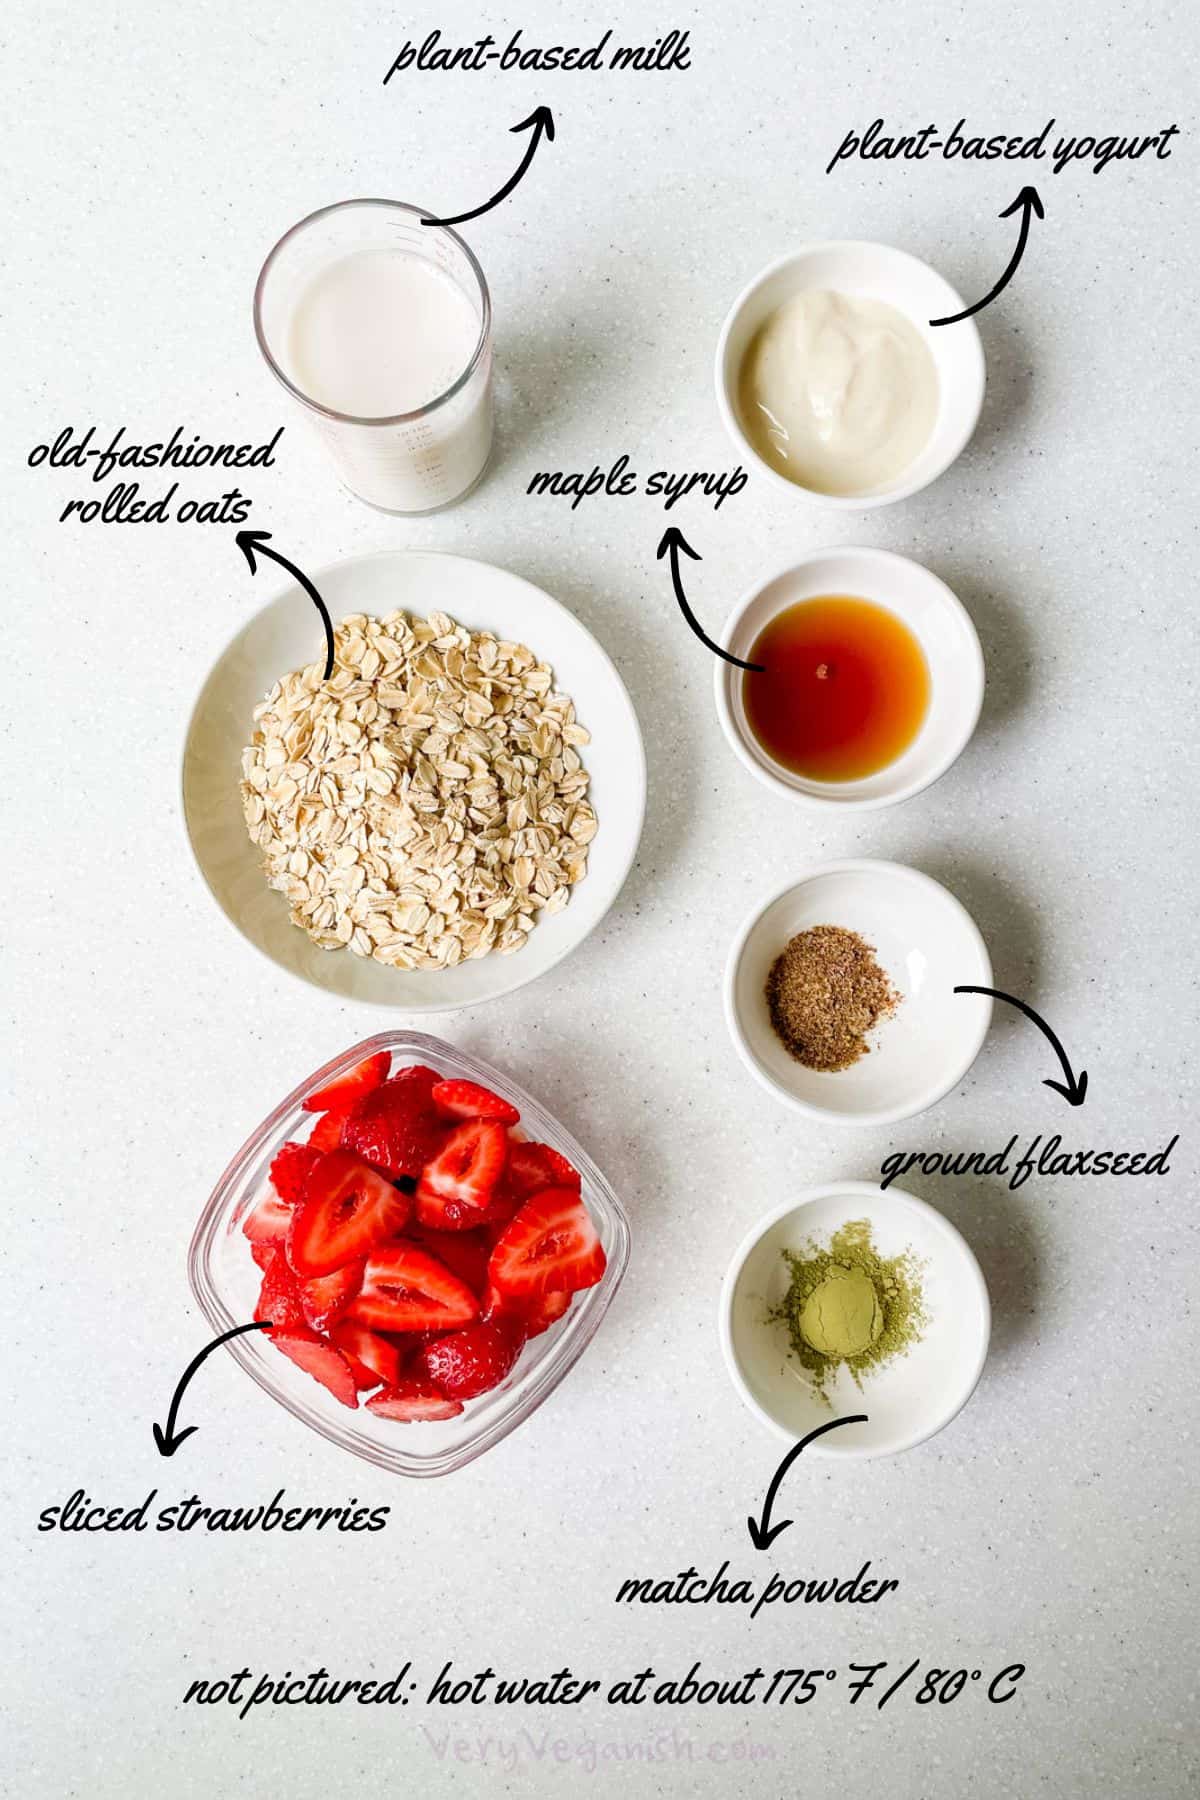 Ingredients laid out for matcha strawberry overnight oats: plant-based milk, plant-based yogurt, rolled oats, maple syrup, ground flax, sliced strawberries, hot water and matcha powder